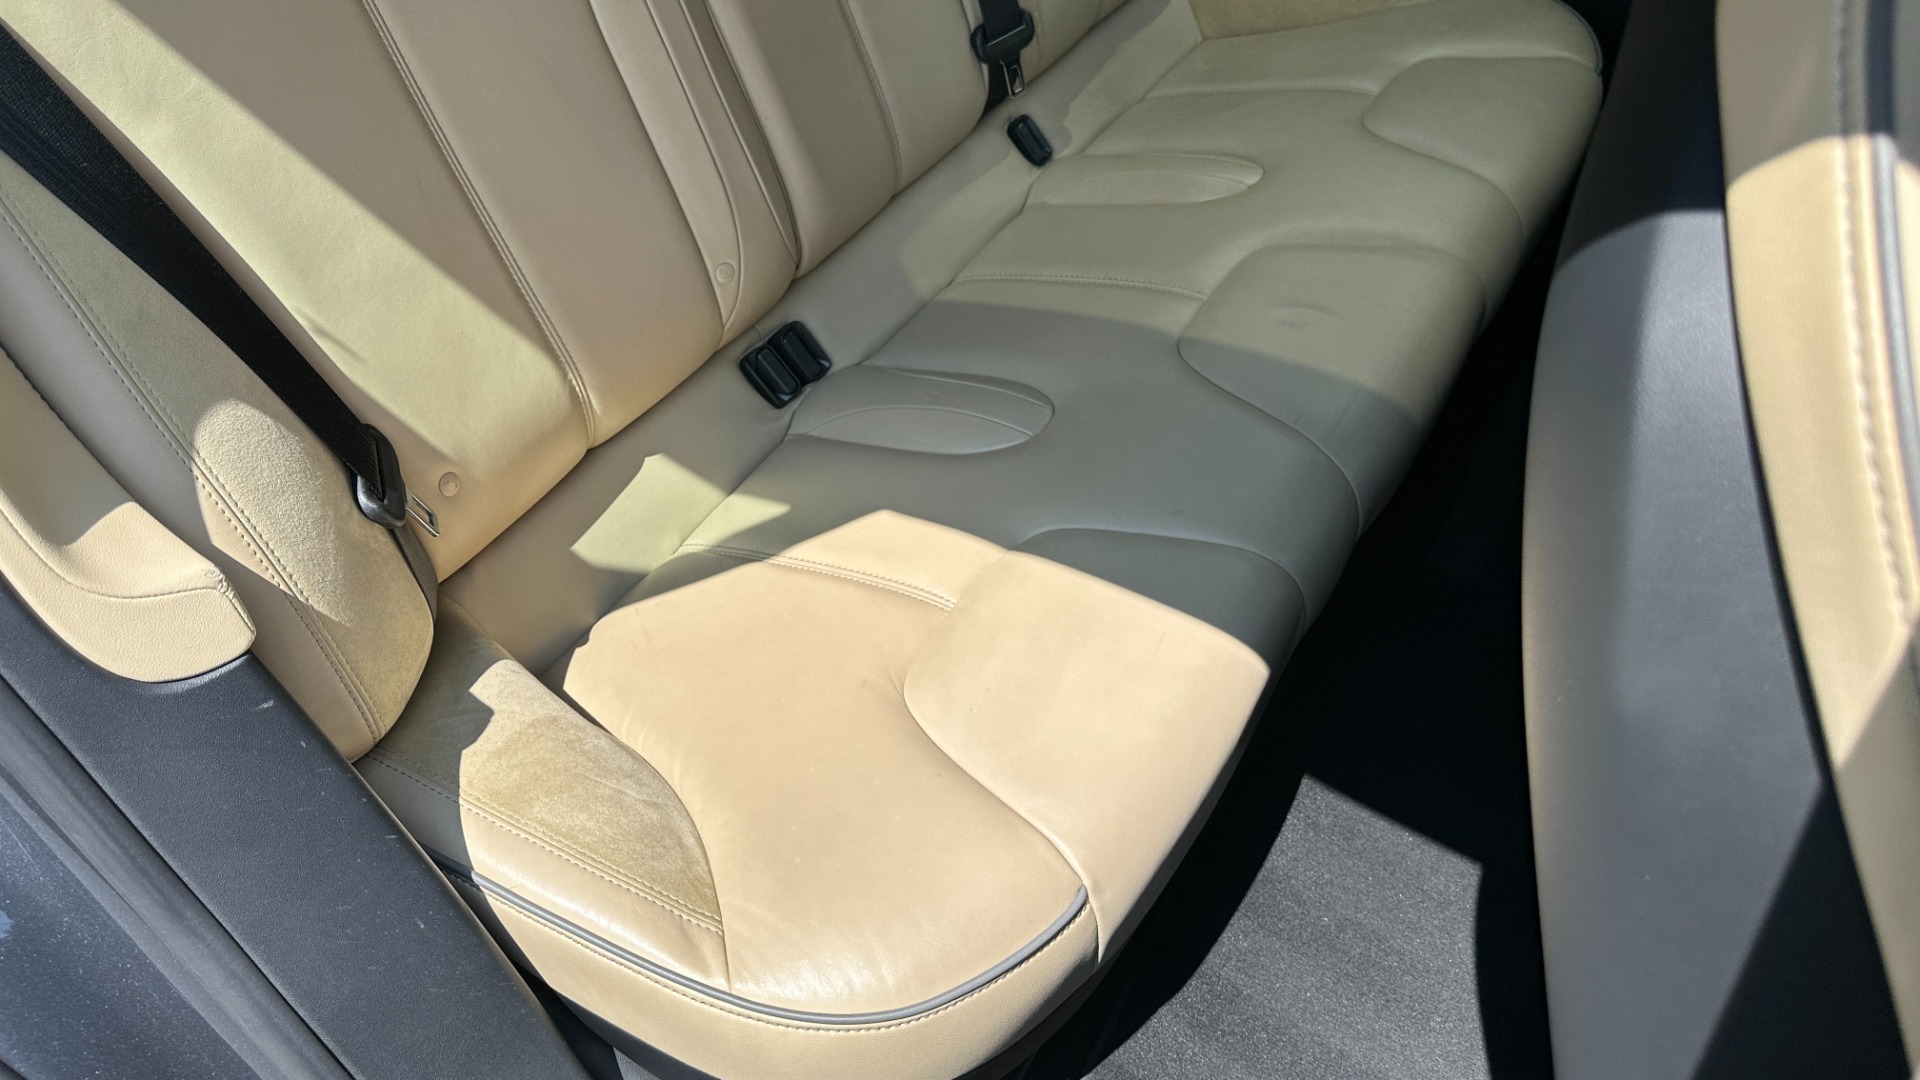 Used 2014 Tesla Model S 60 kWh Battery / 60D / PREMIUM CONNECTIVITY / LEATHER / SUNROOF for sale $22,995 at Formula Imports in Charlotte NC 28227 31